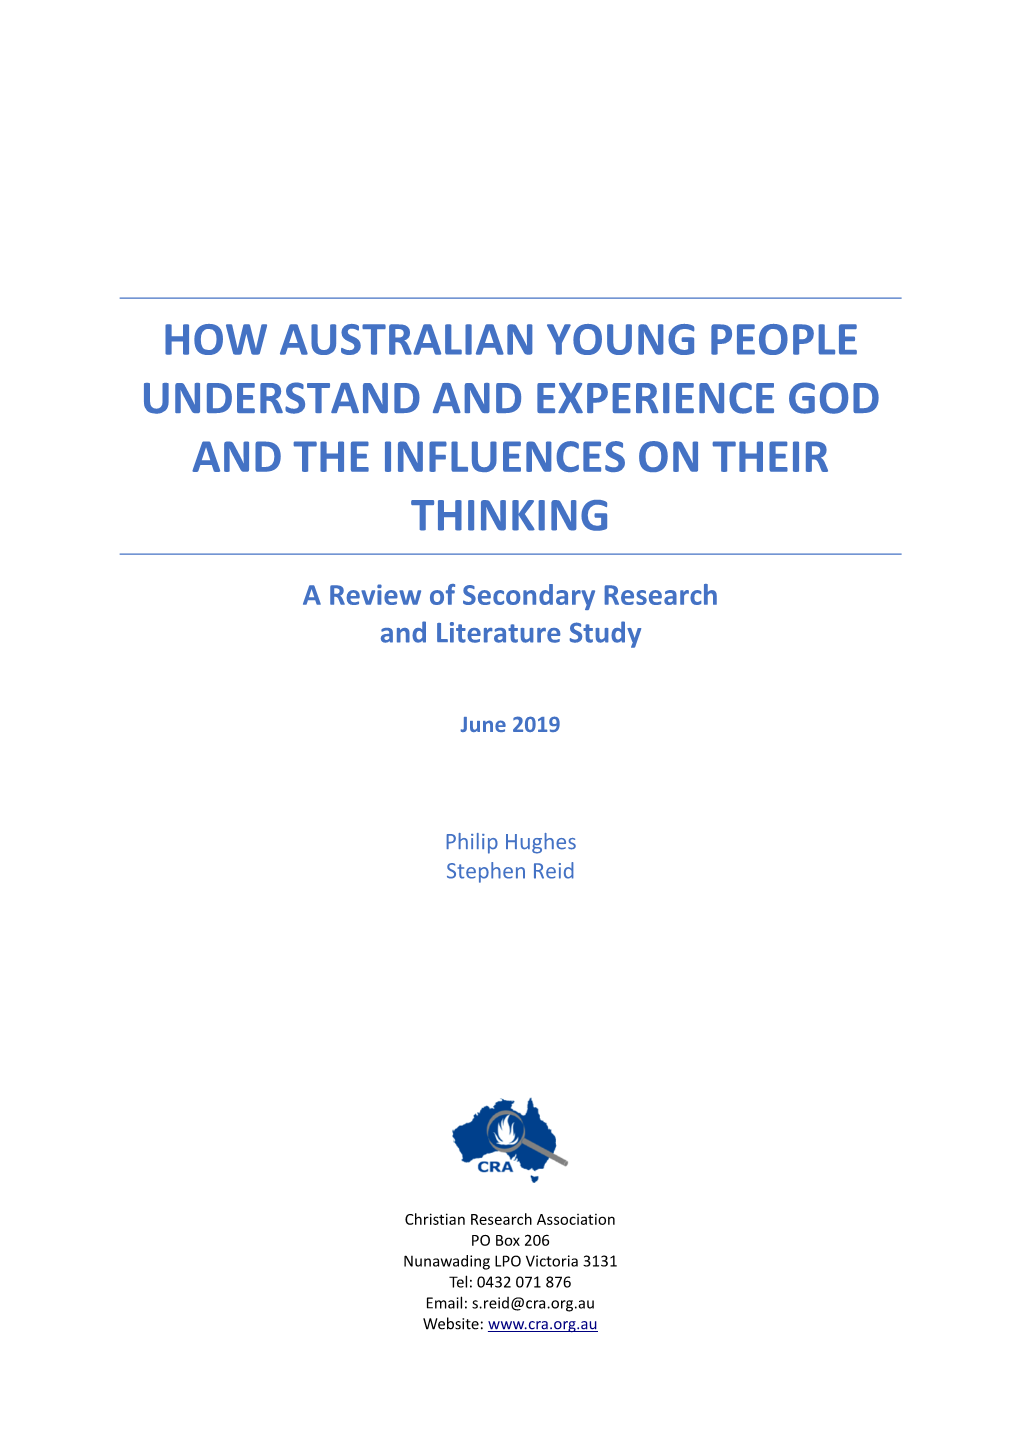 How Australian Young People Understand and Experience God and the Influences on Their Thinking